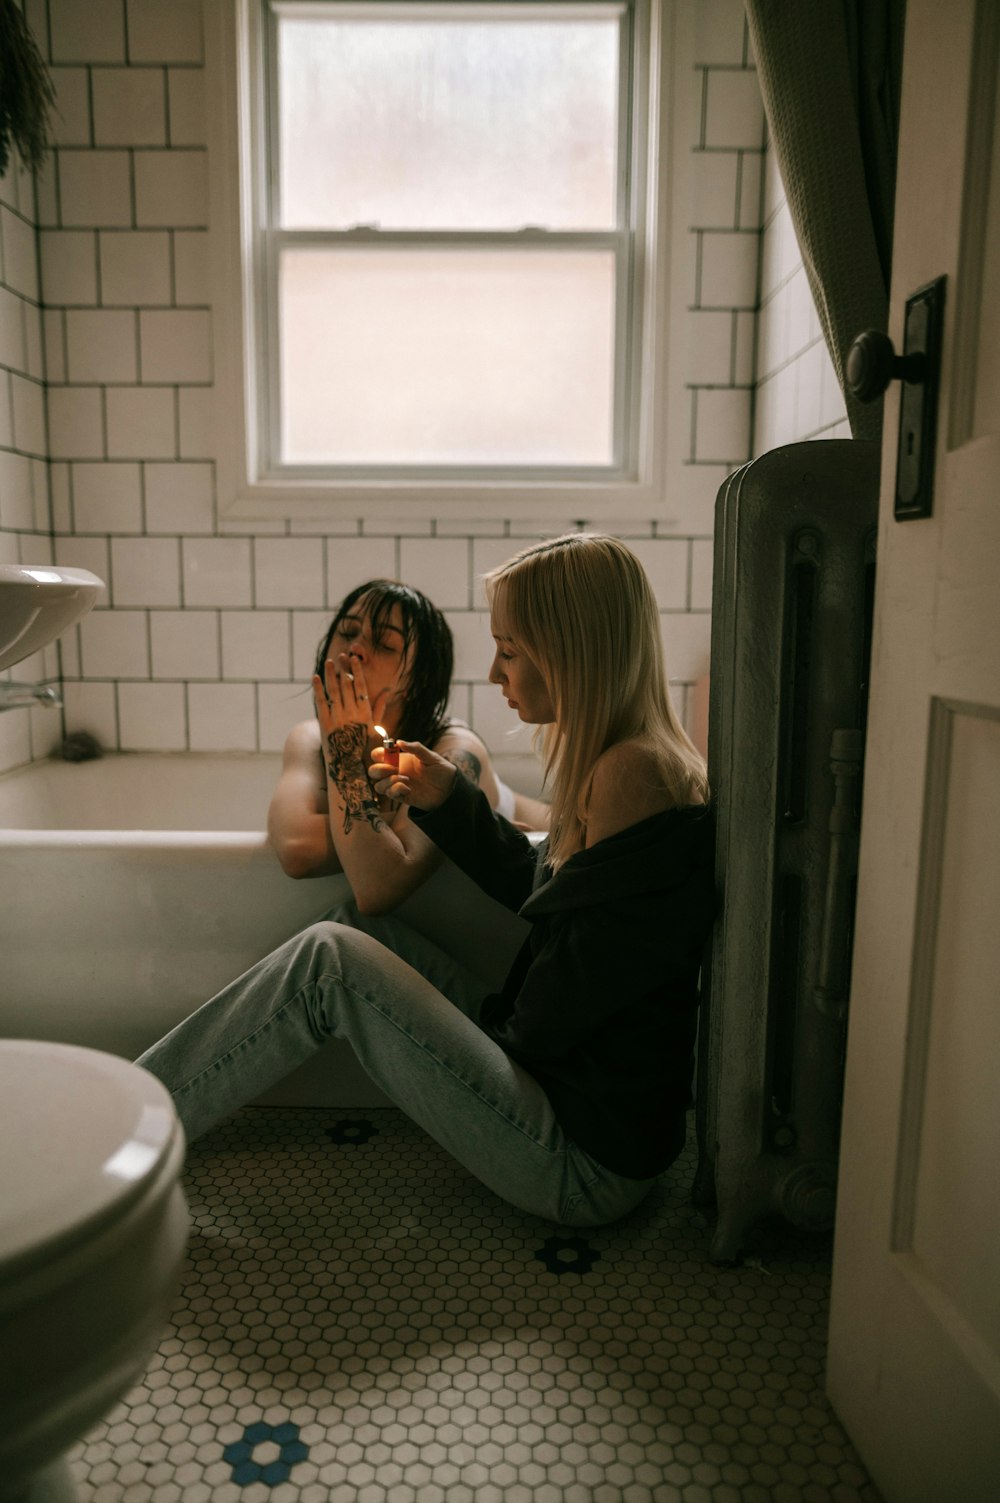 a woman sitting on the floor of a bathroom next to a man